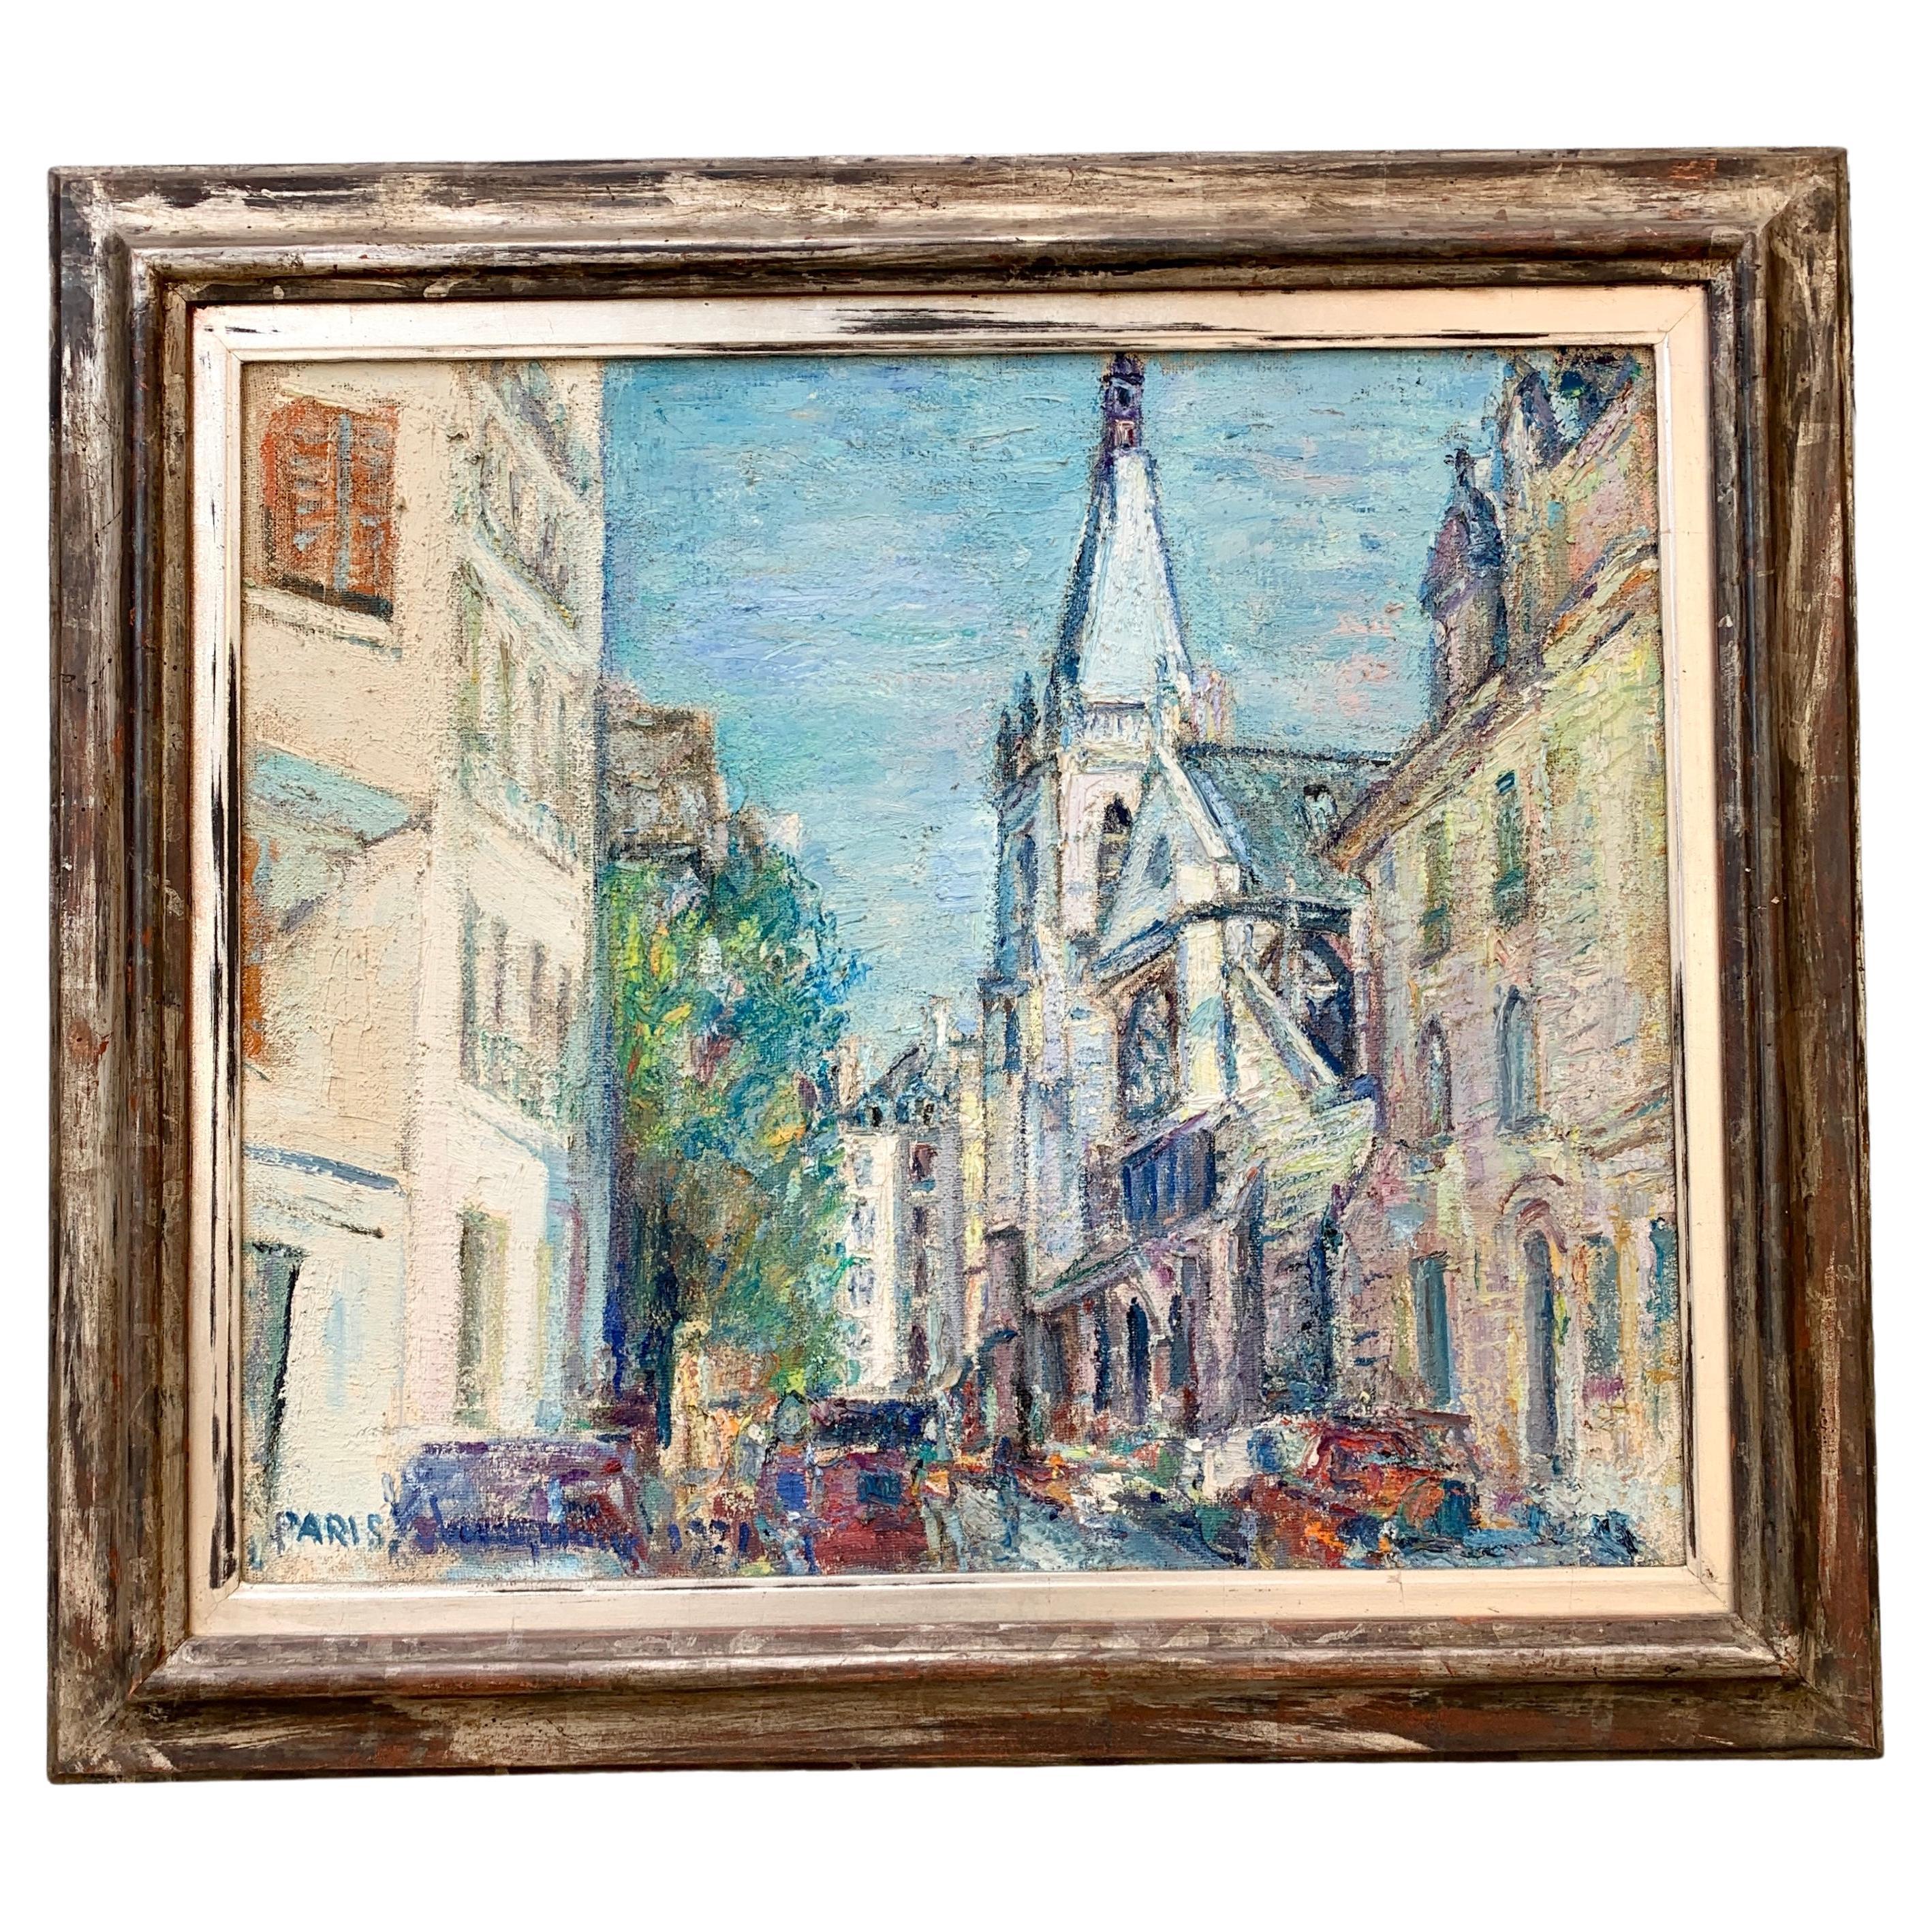 Colorful 20th Century Oil Painting of Paris by Italian Artist Piero Solavaggione For Sale